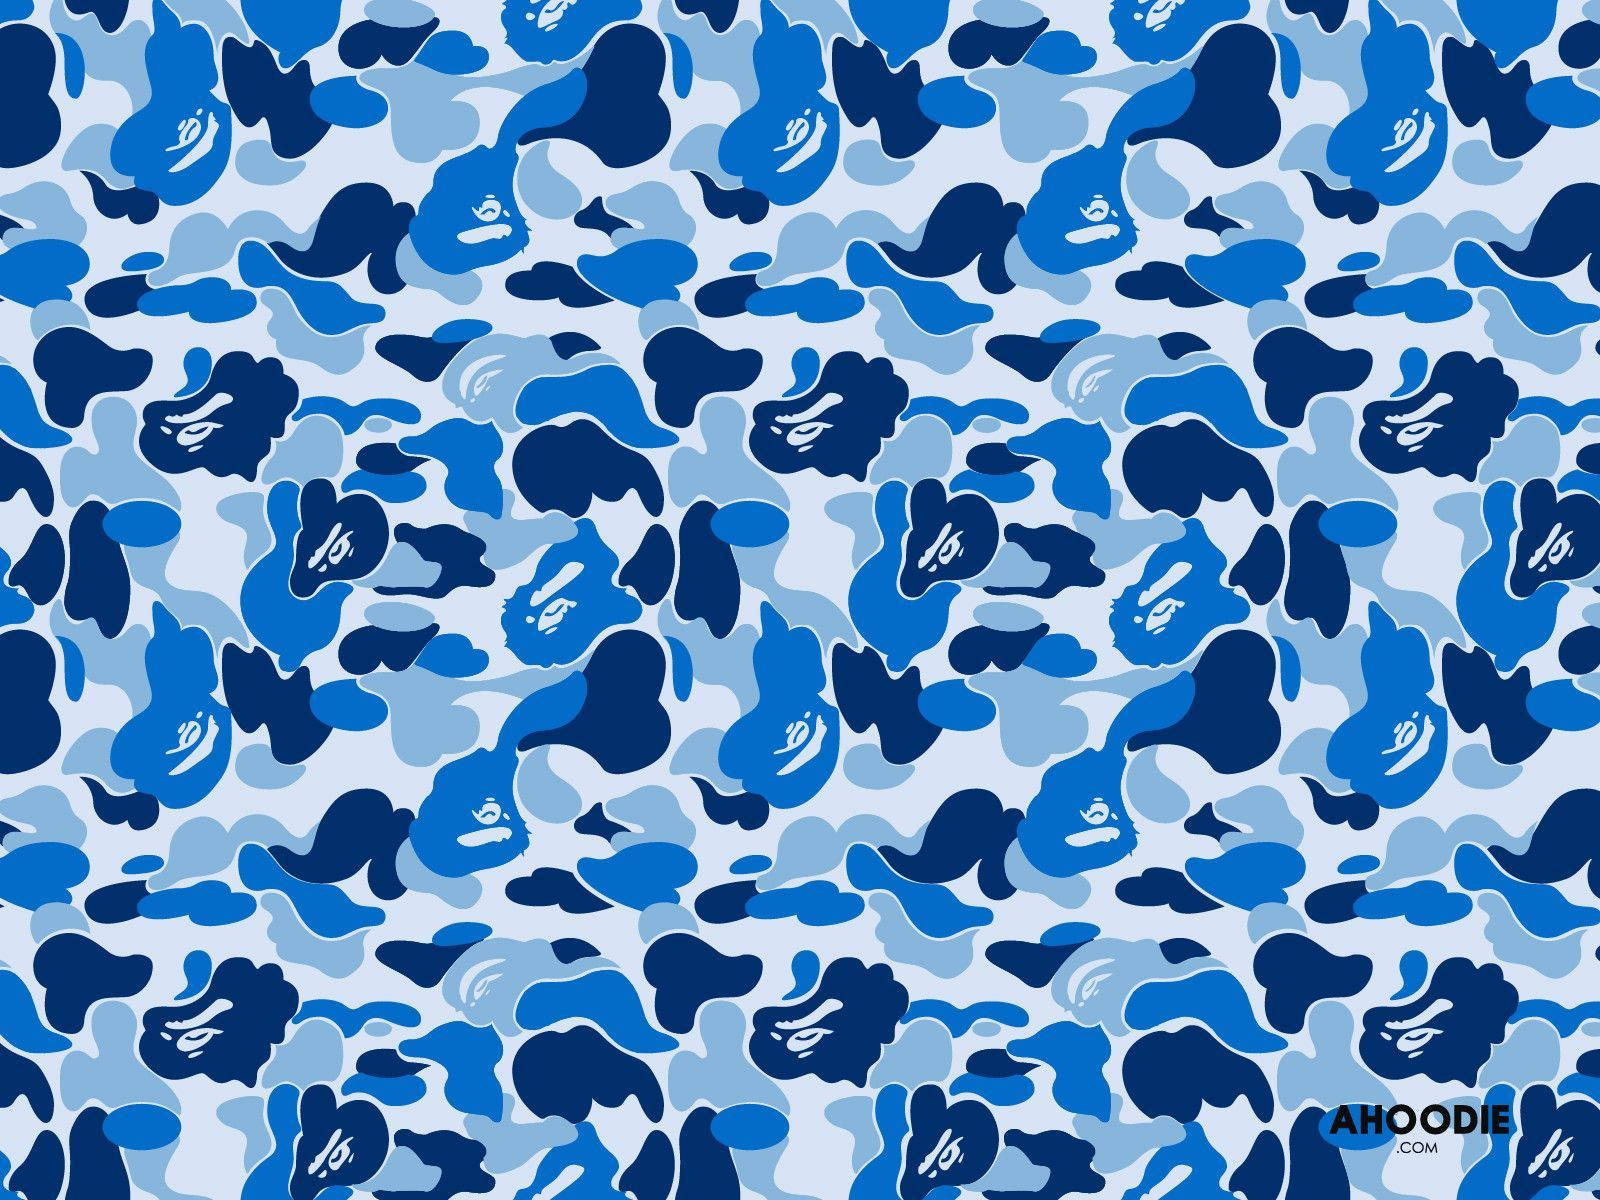 Up-level your wardrobe swag with this blue camo BAPE streetwear design - exclusive from Wallpapers.com! Wallpaper